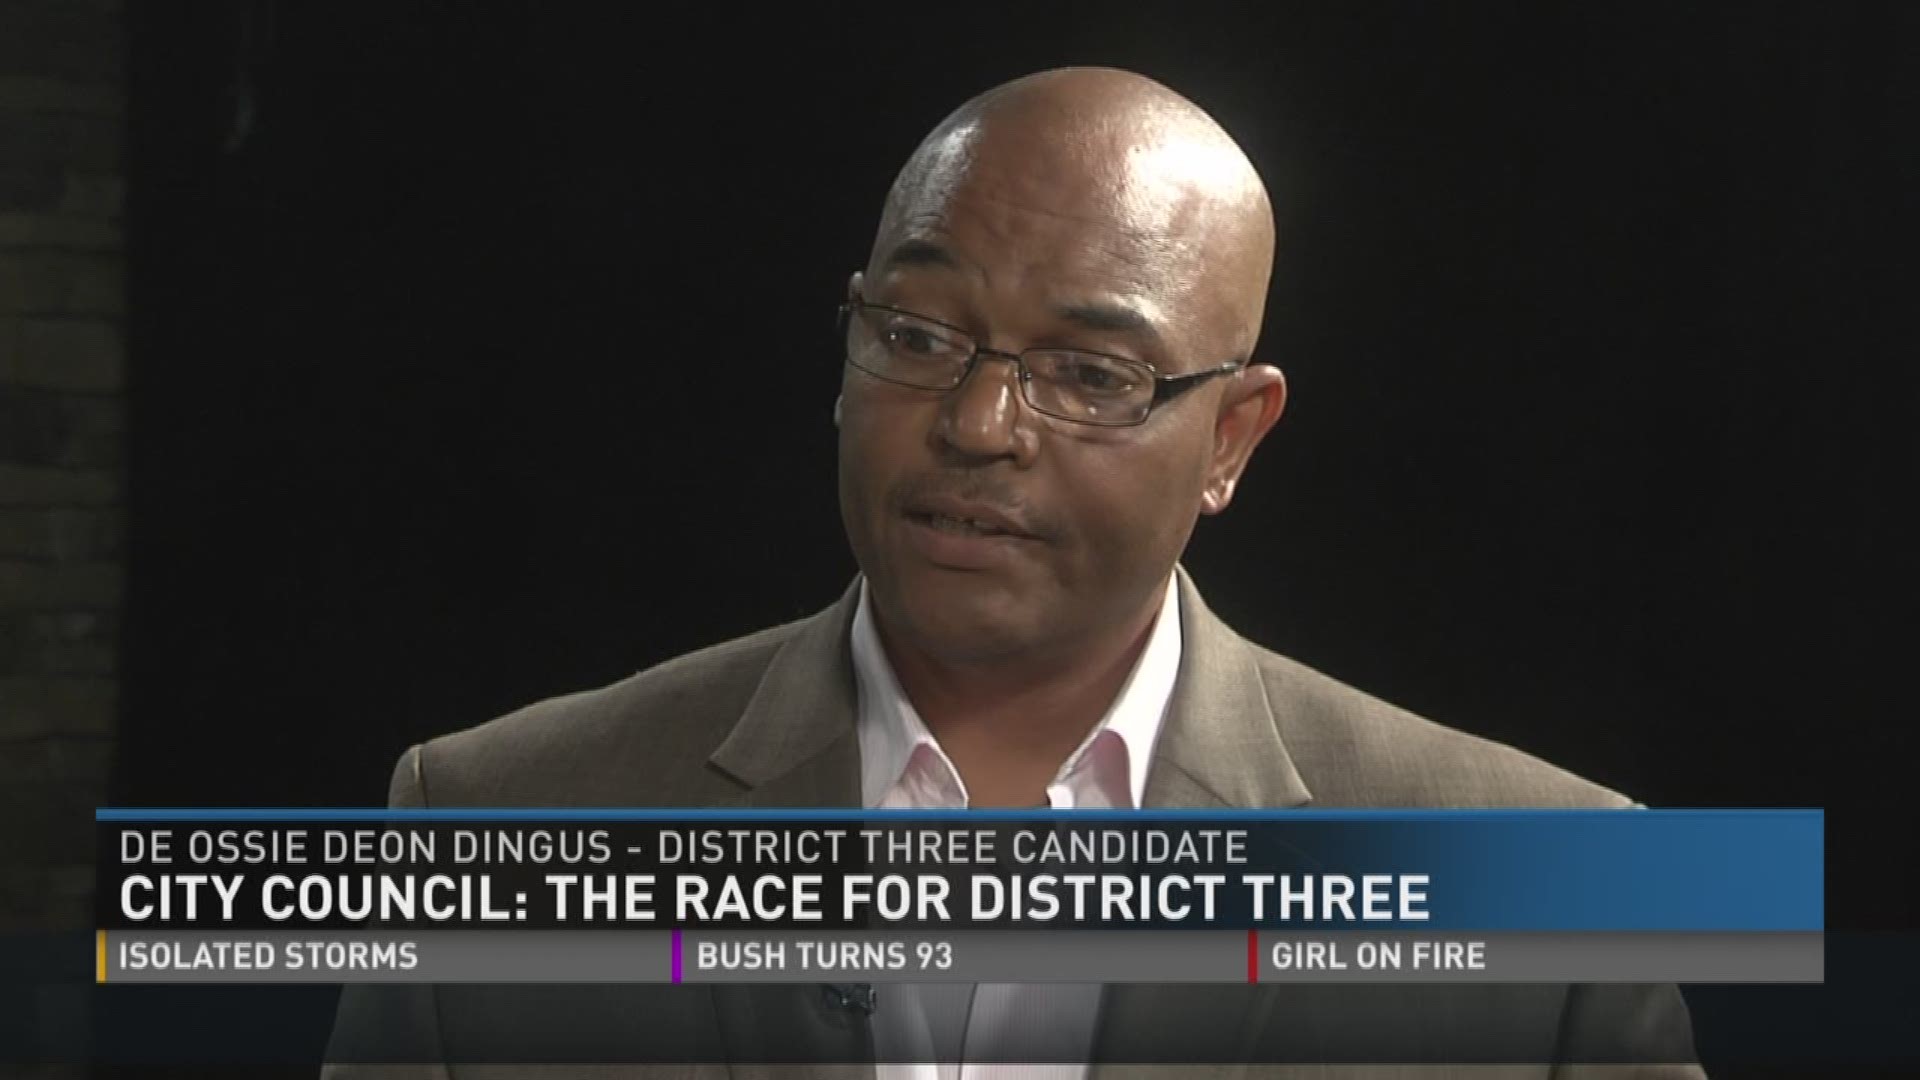 De Ossie Deon Dingus is one of four candidates running for the open seat in District 3 on Knoxville's City Council.